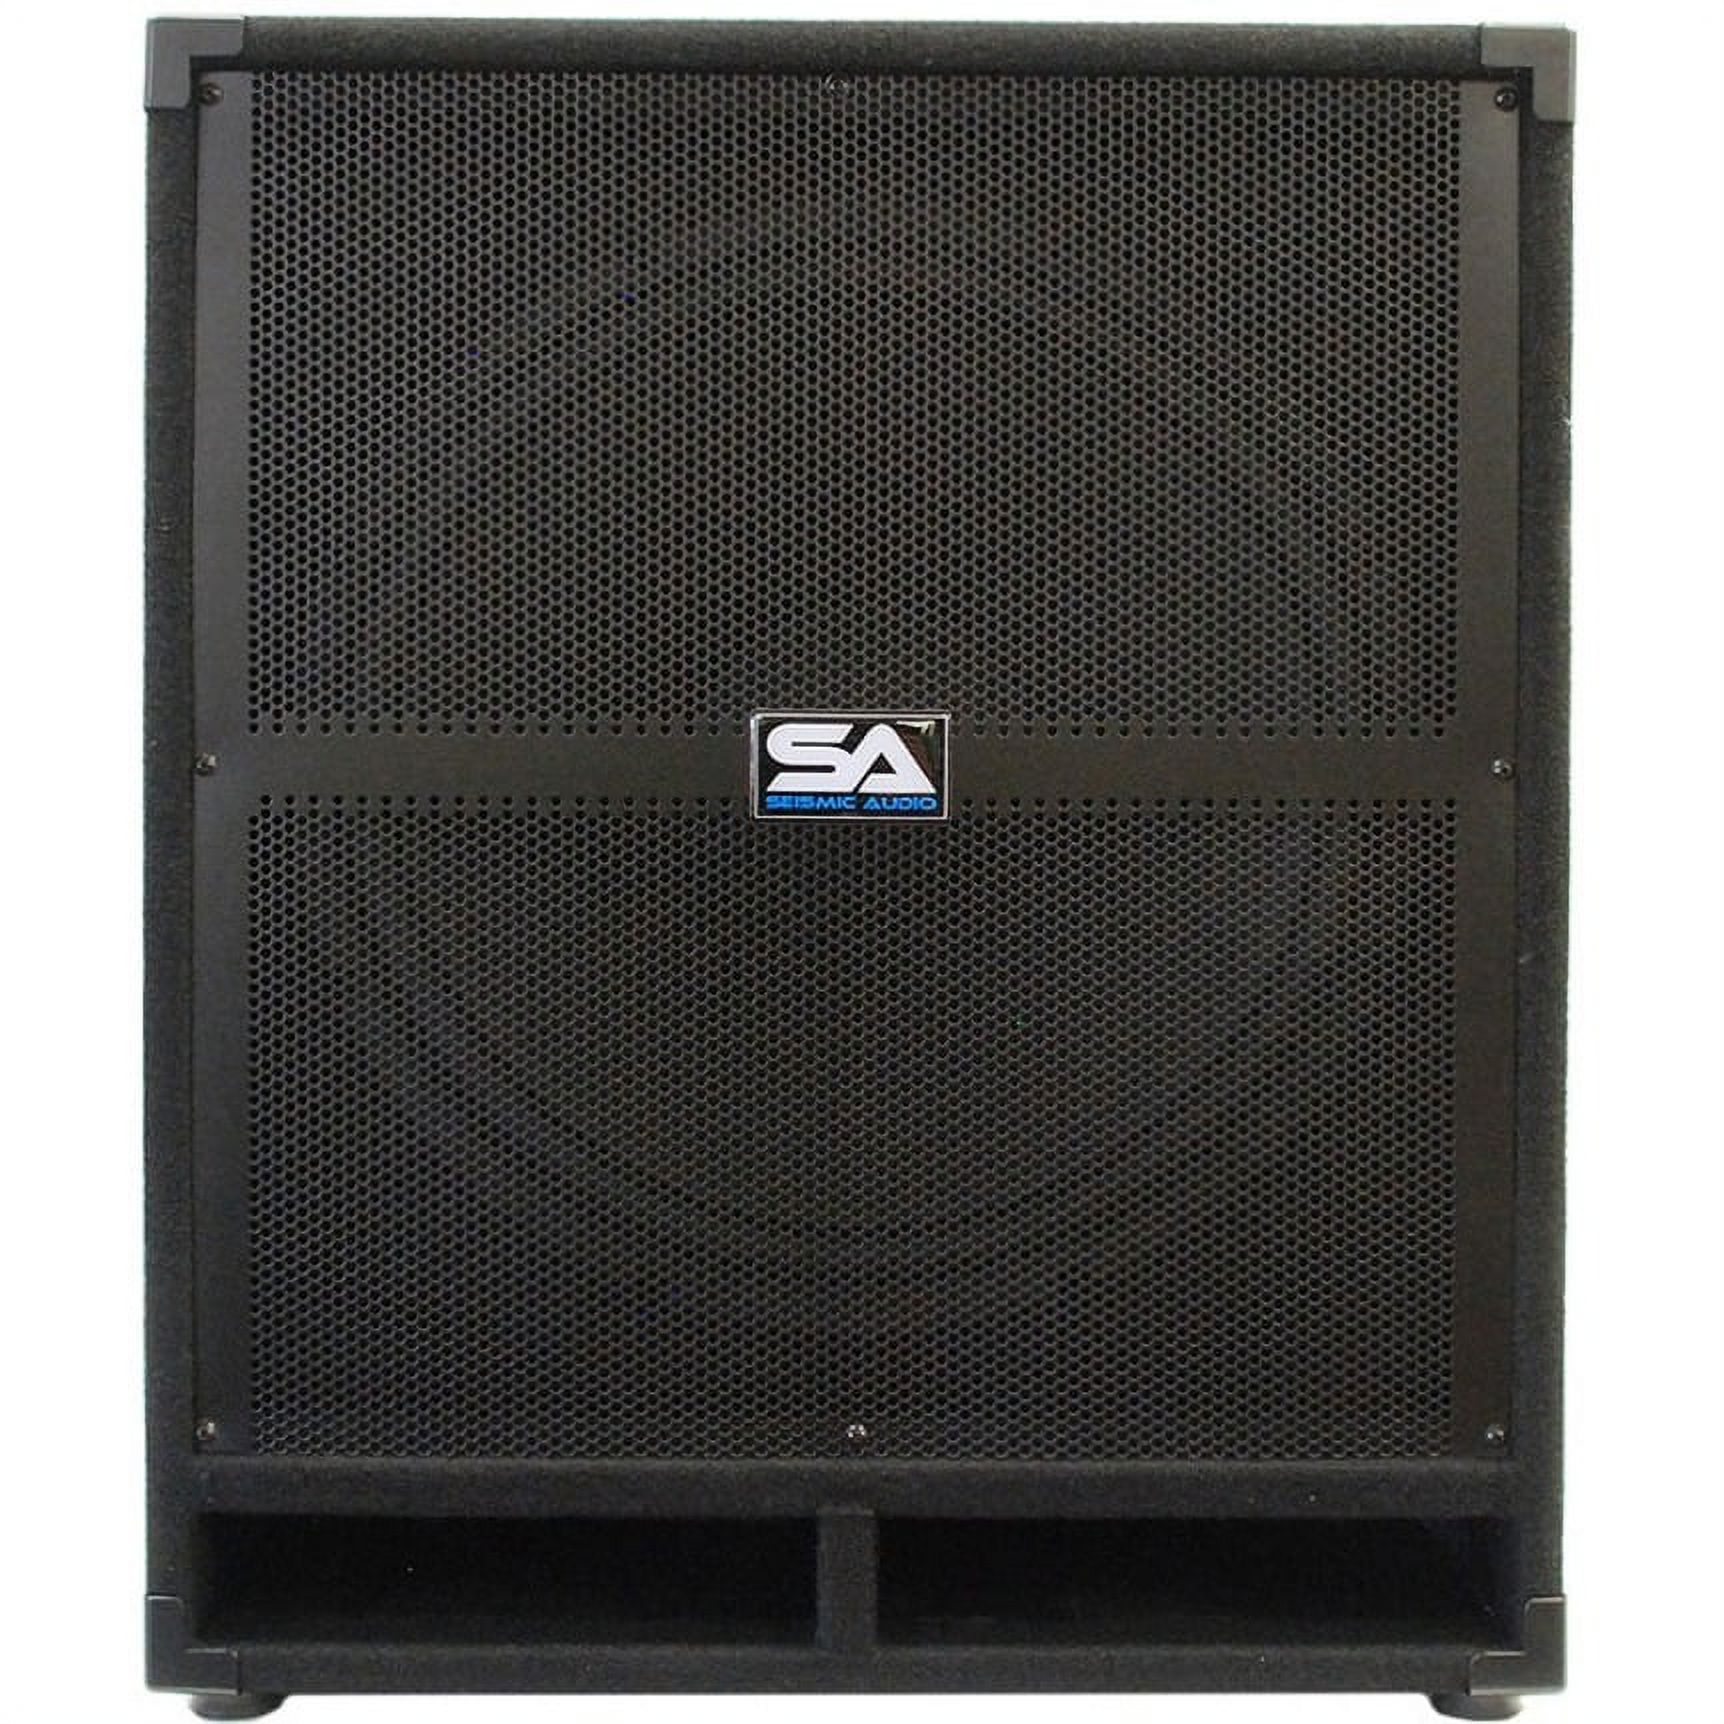 Seismic Audio Tremor 18 Subwoofer System, 500 W RMS, Black - image 2 of 6